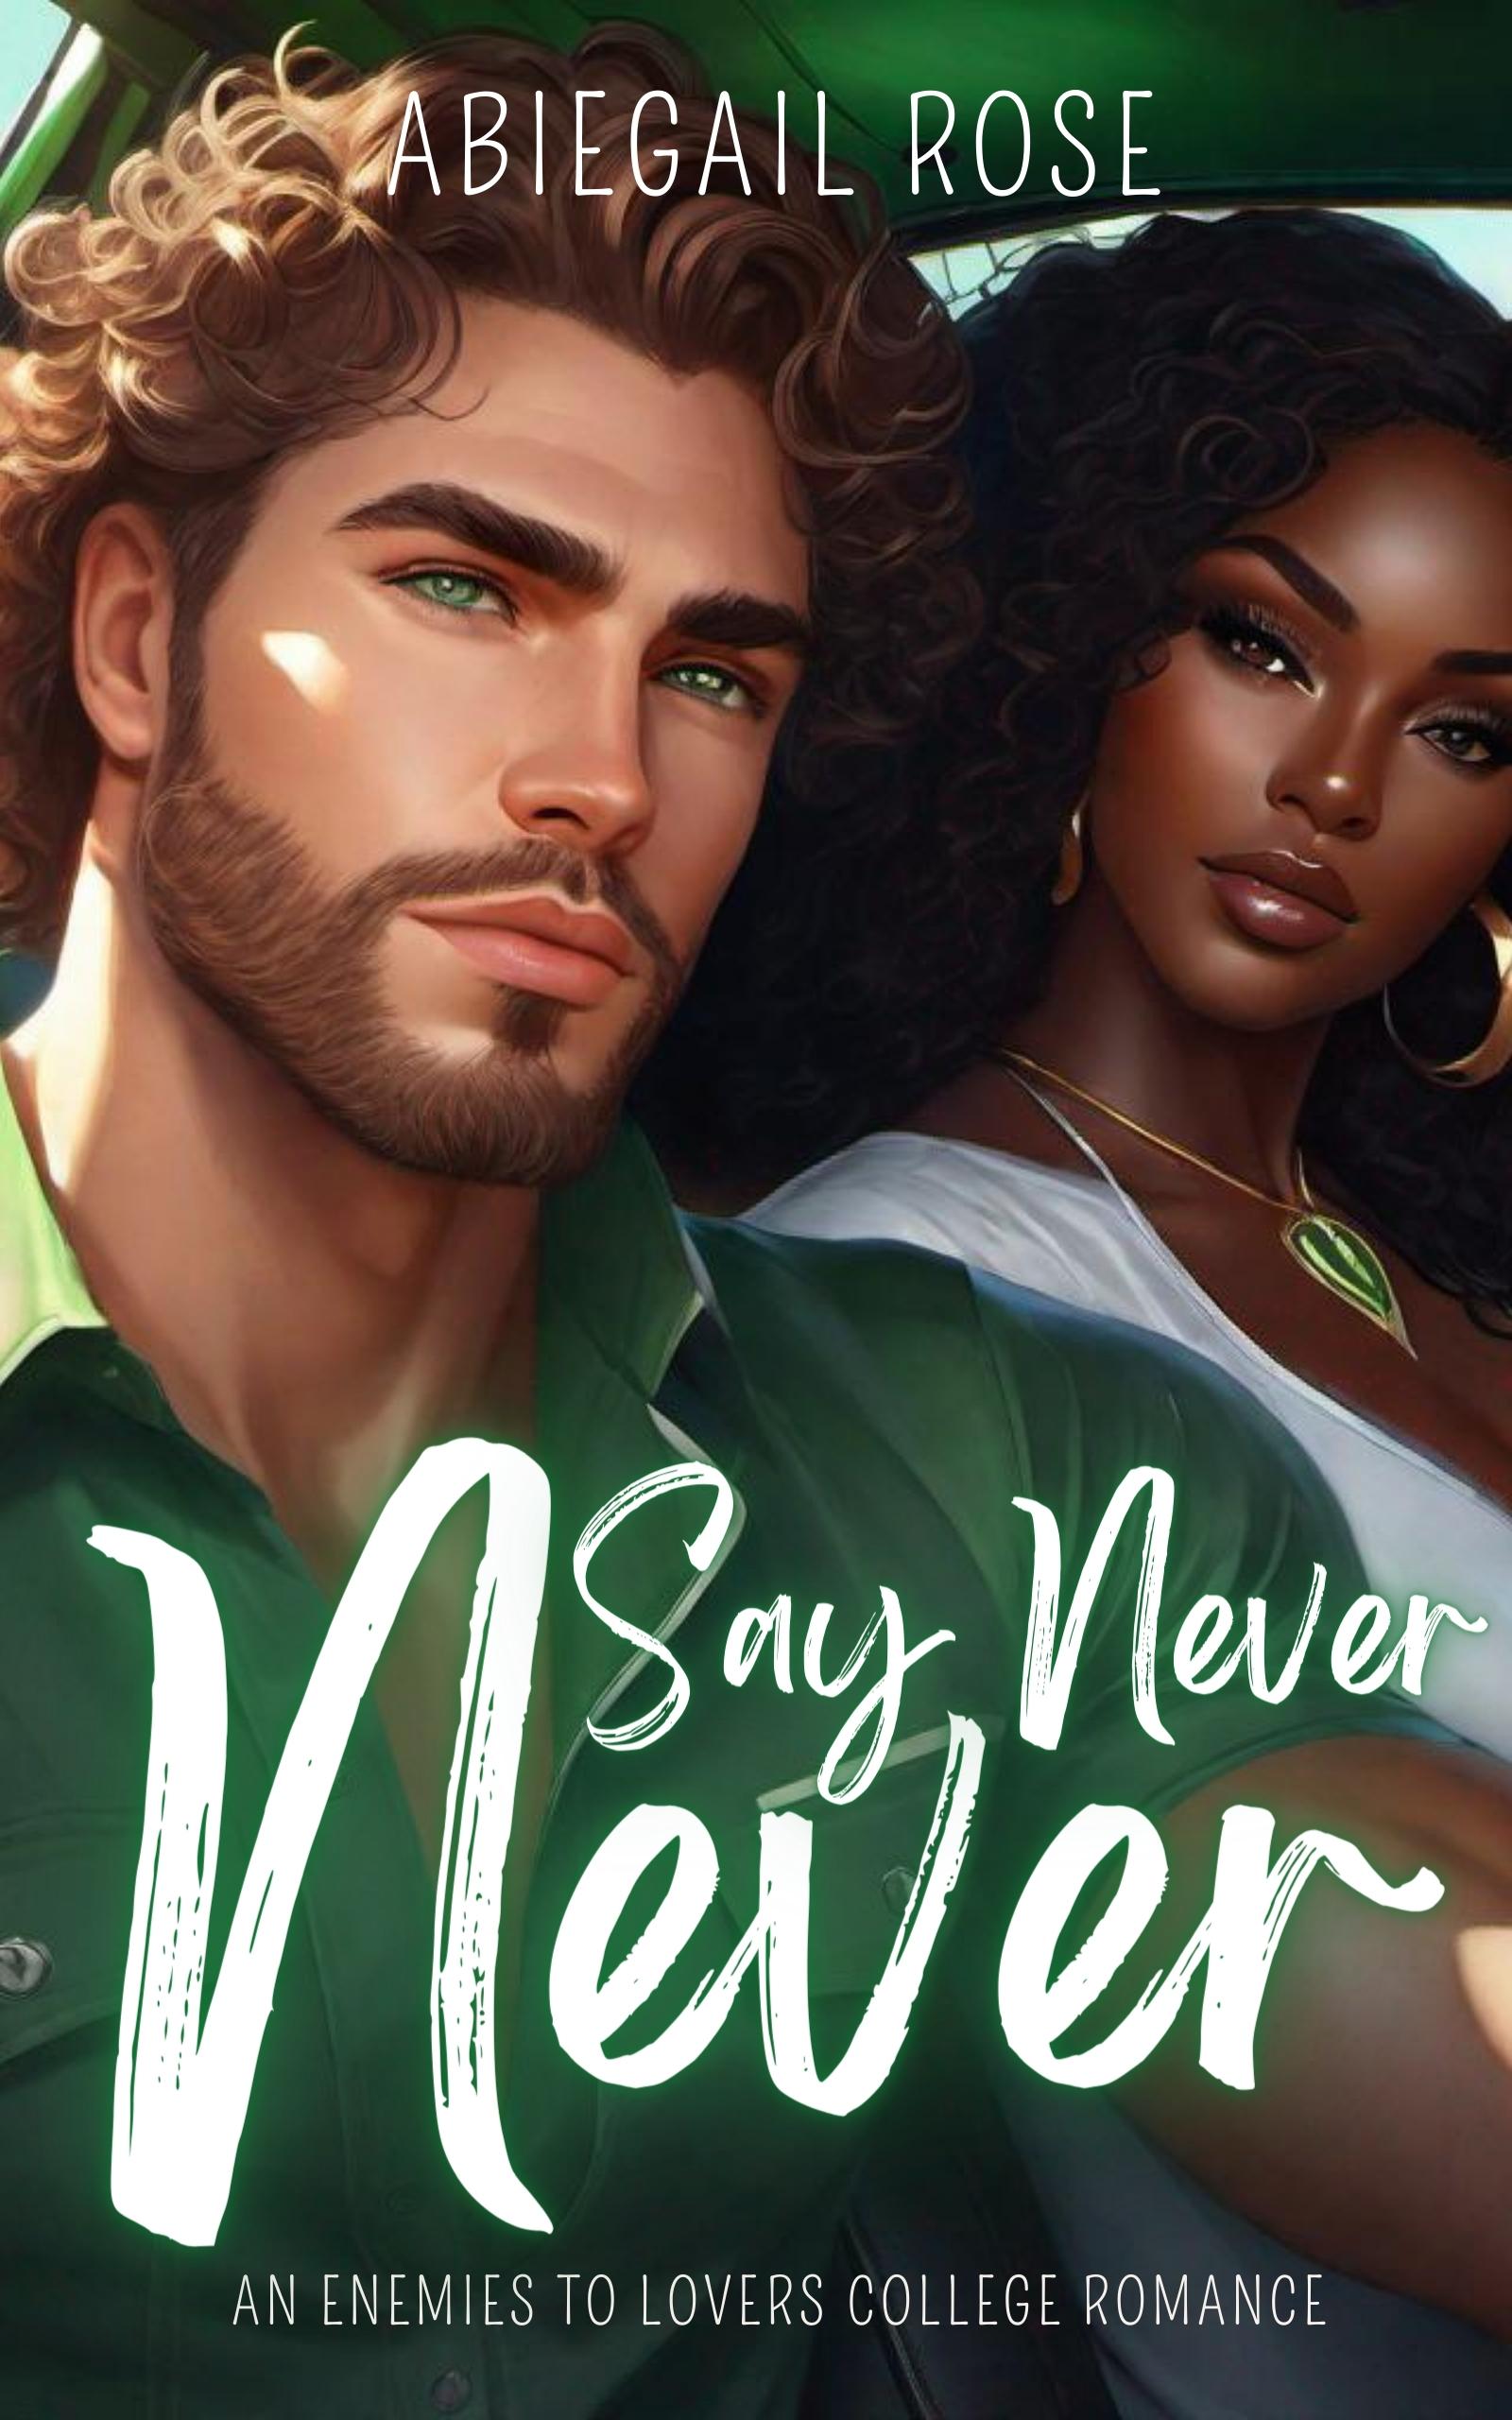 Never Say Never by Abiegail Rose